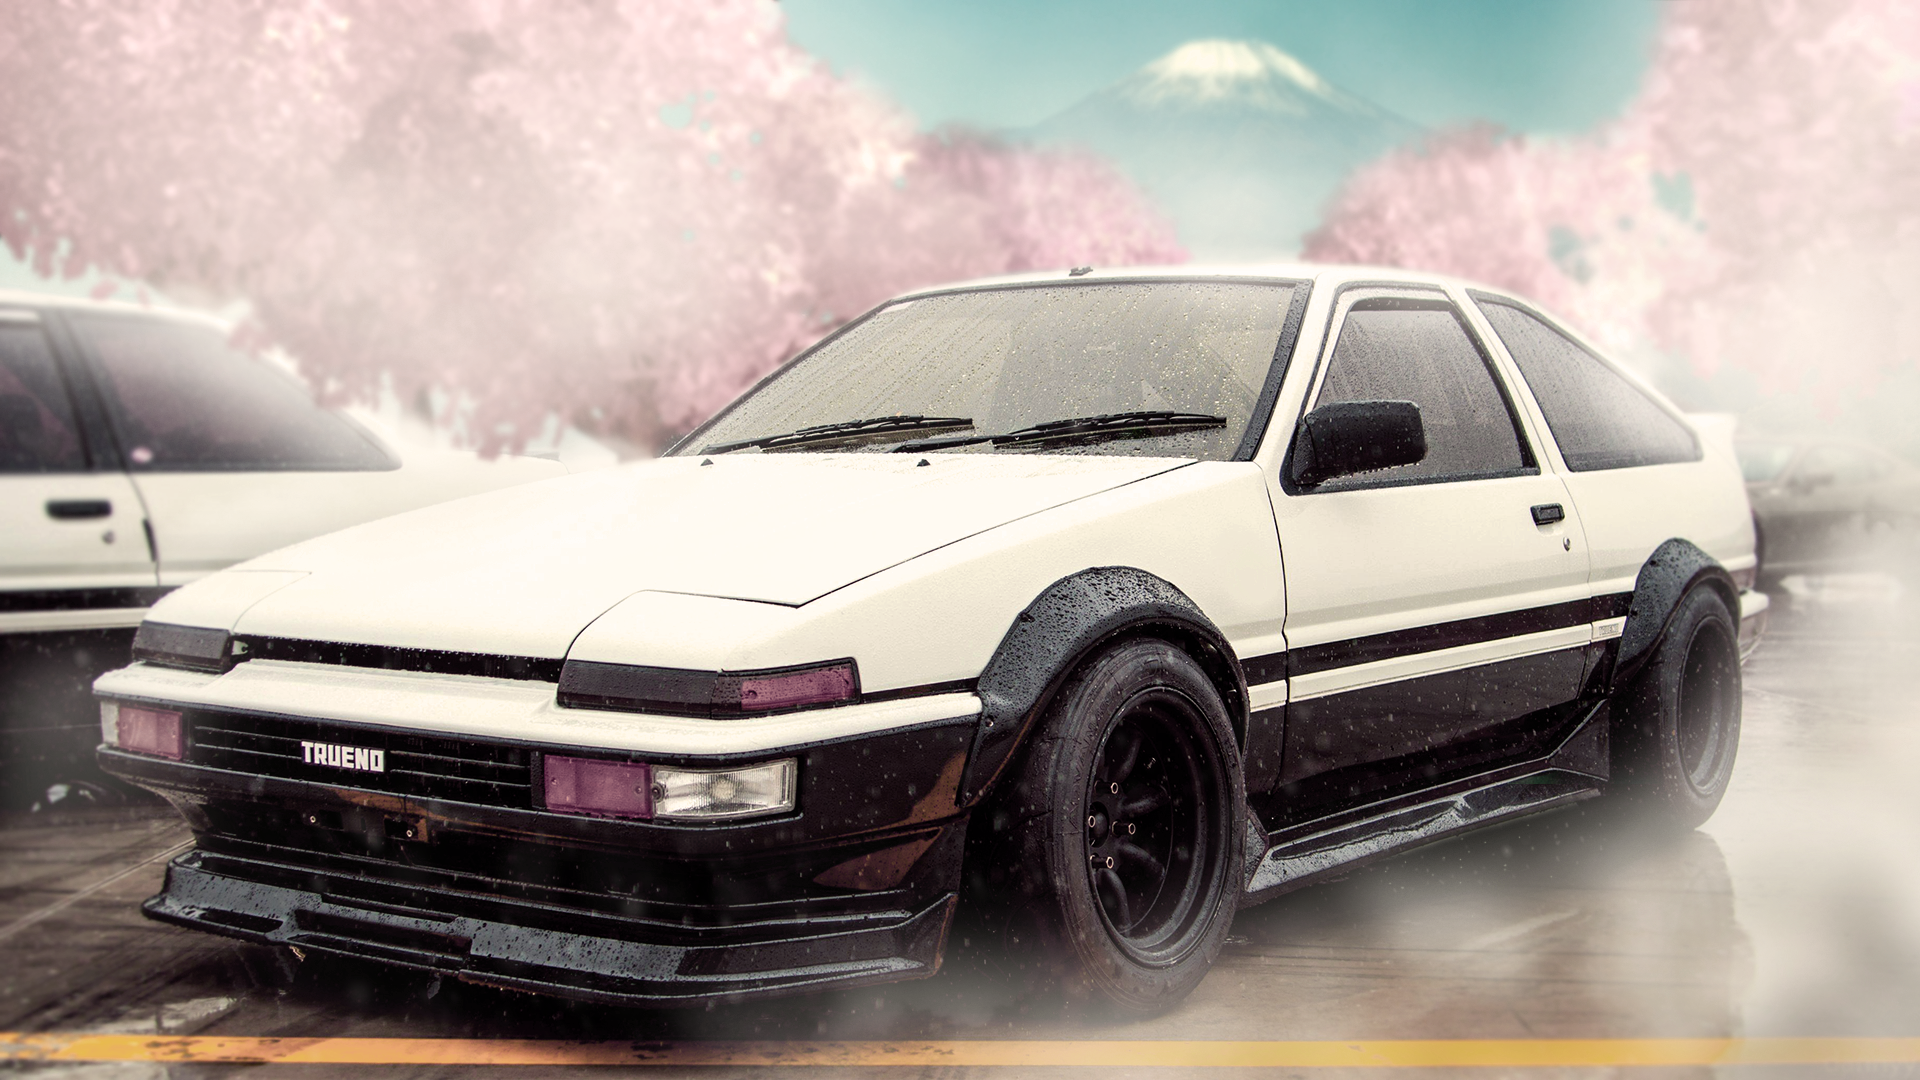 Ae86 Wallpaper I Made For My Puter Not Very Good But